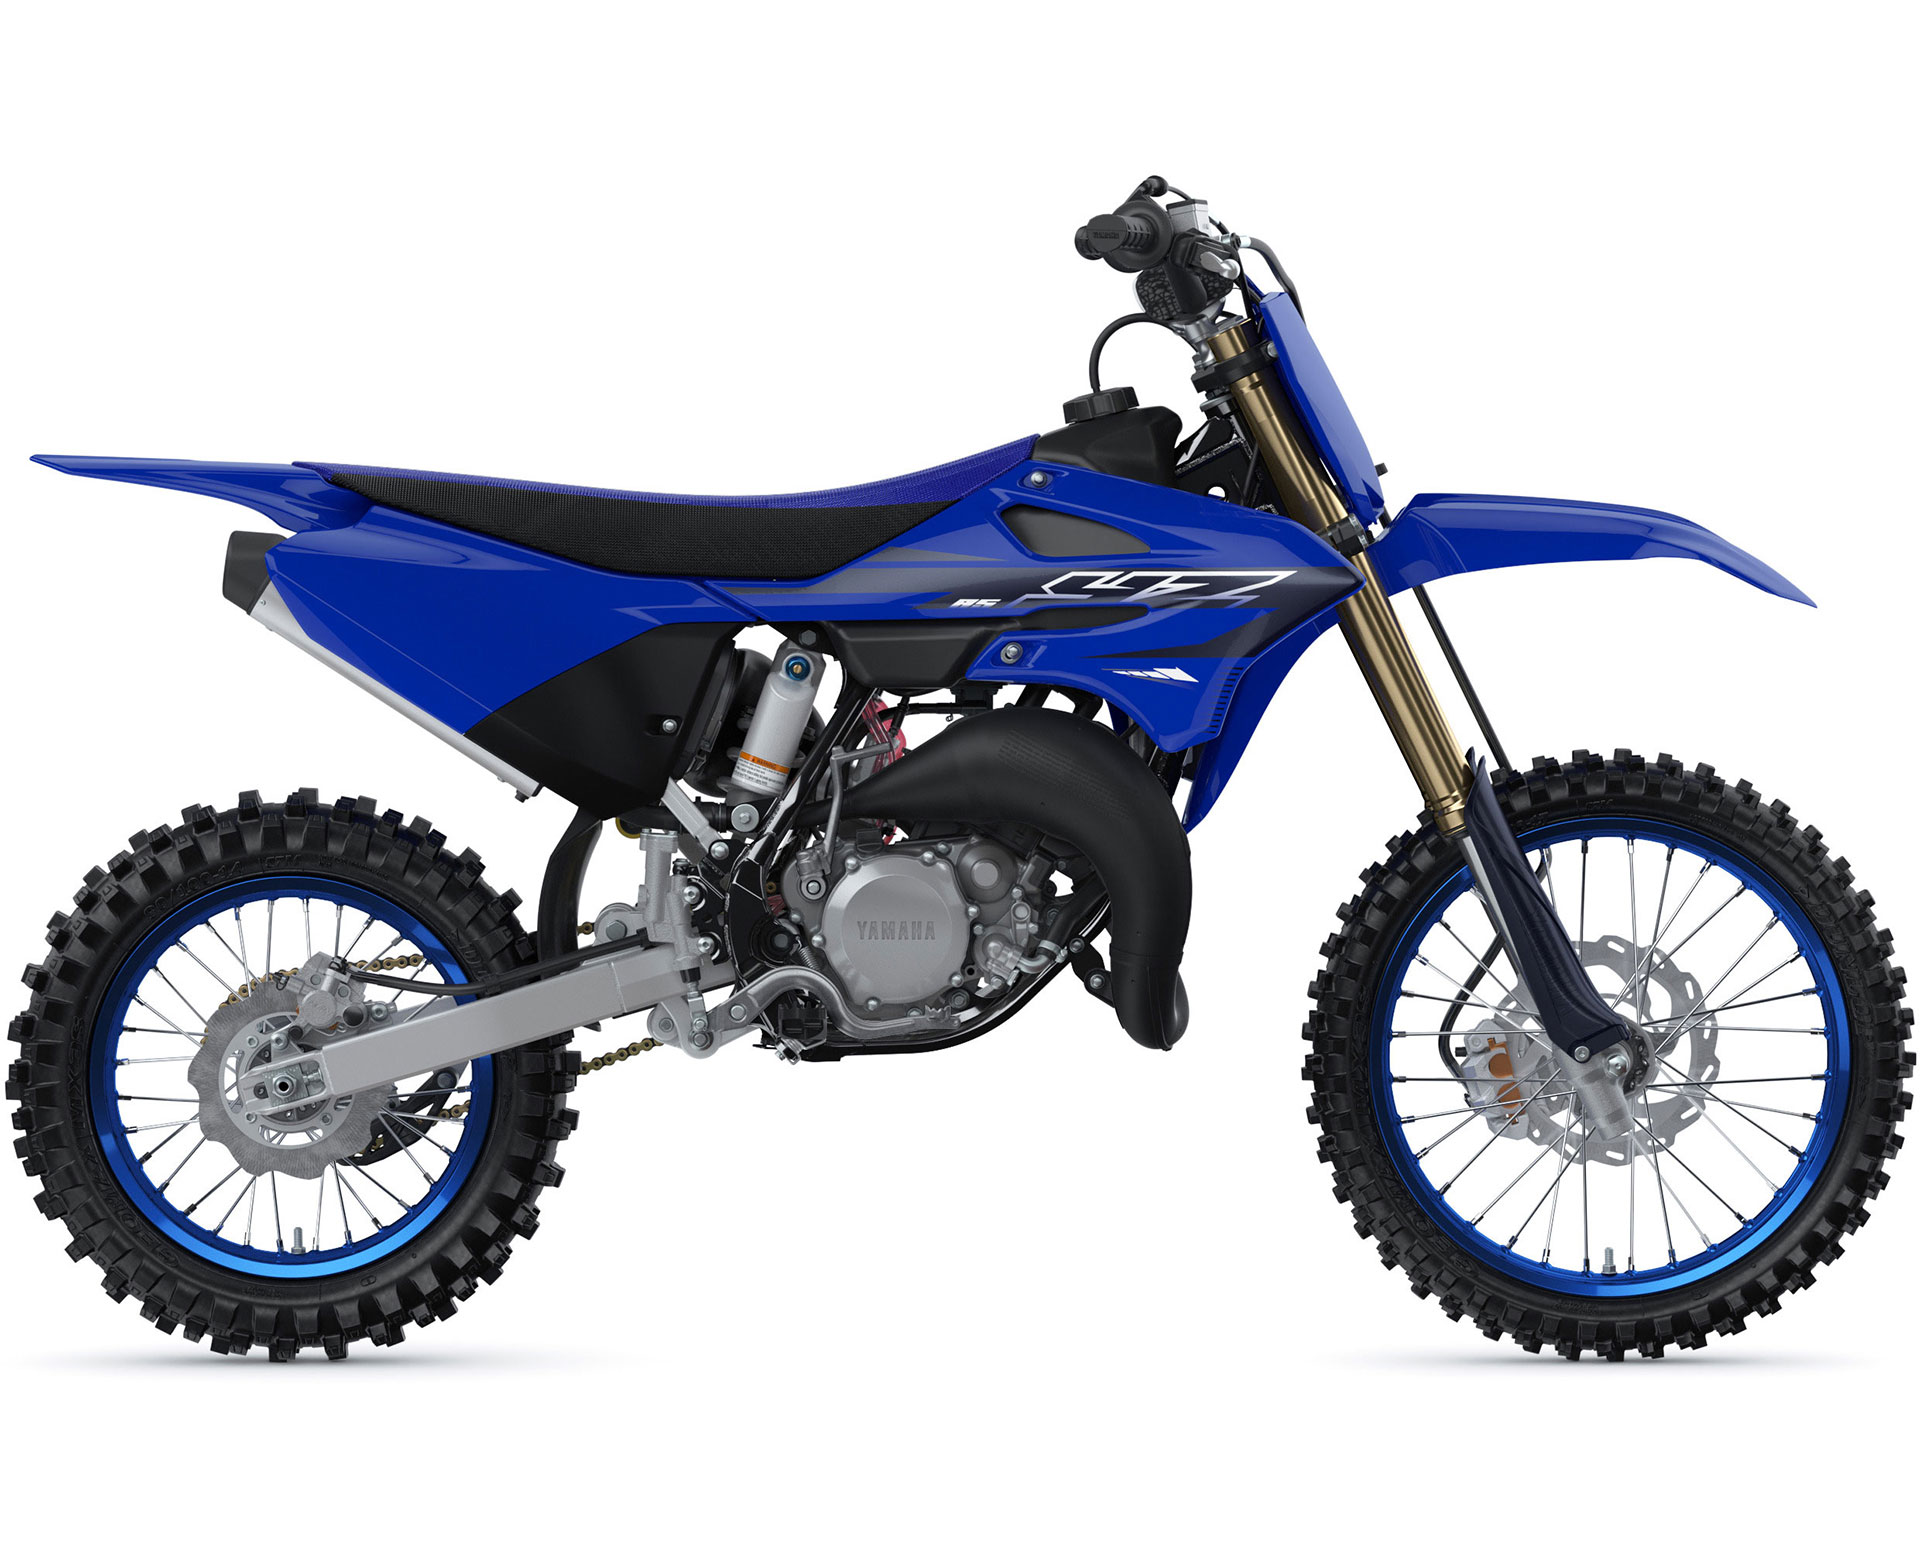 Thumbnail of your customized 2023 YZ85